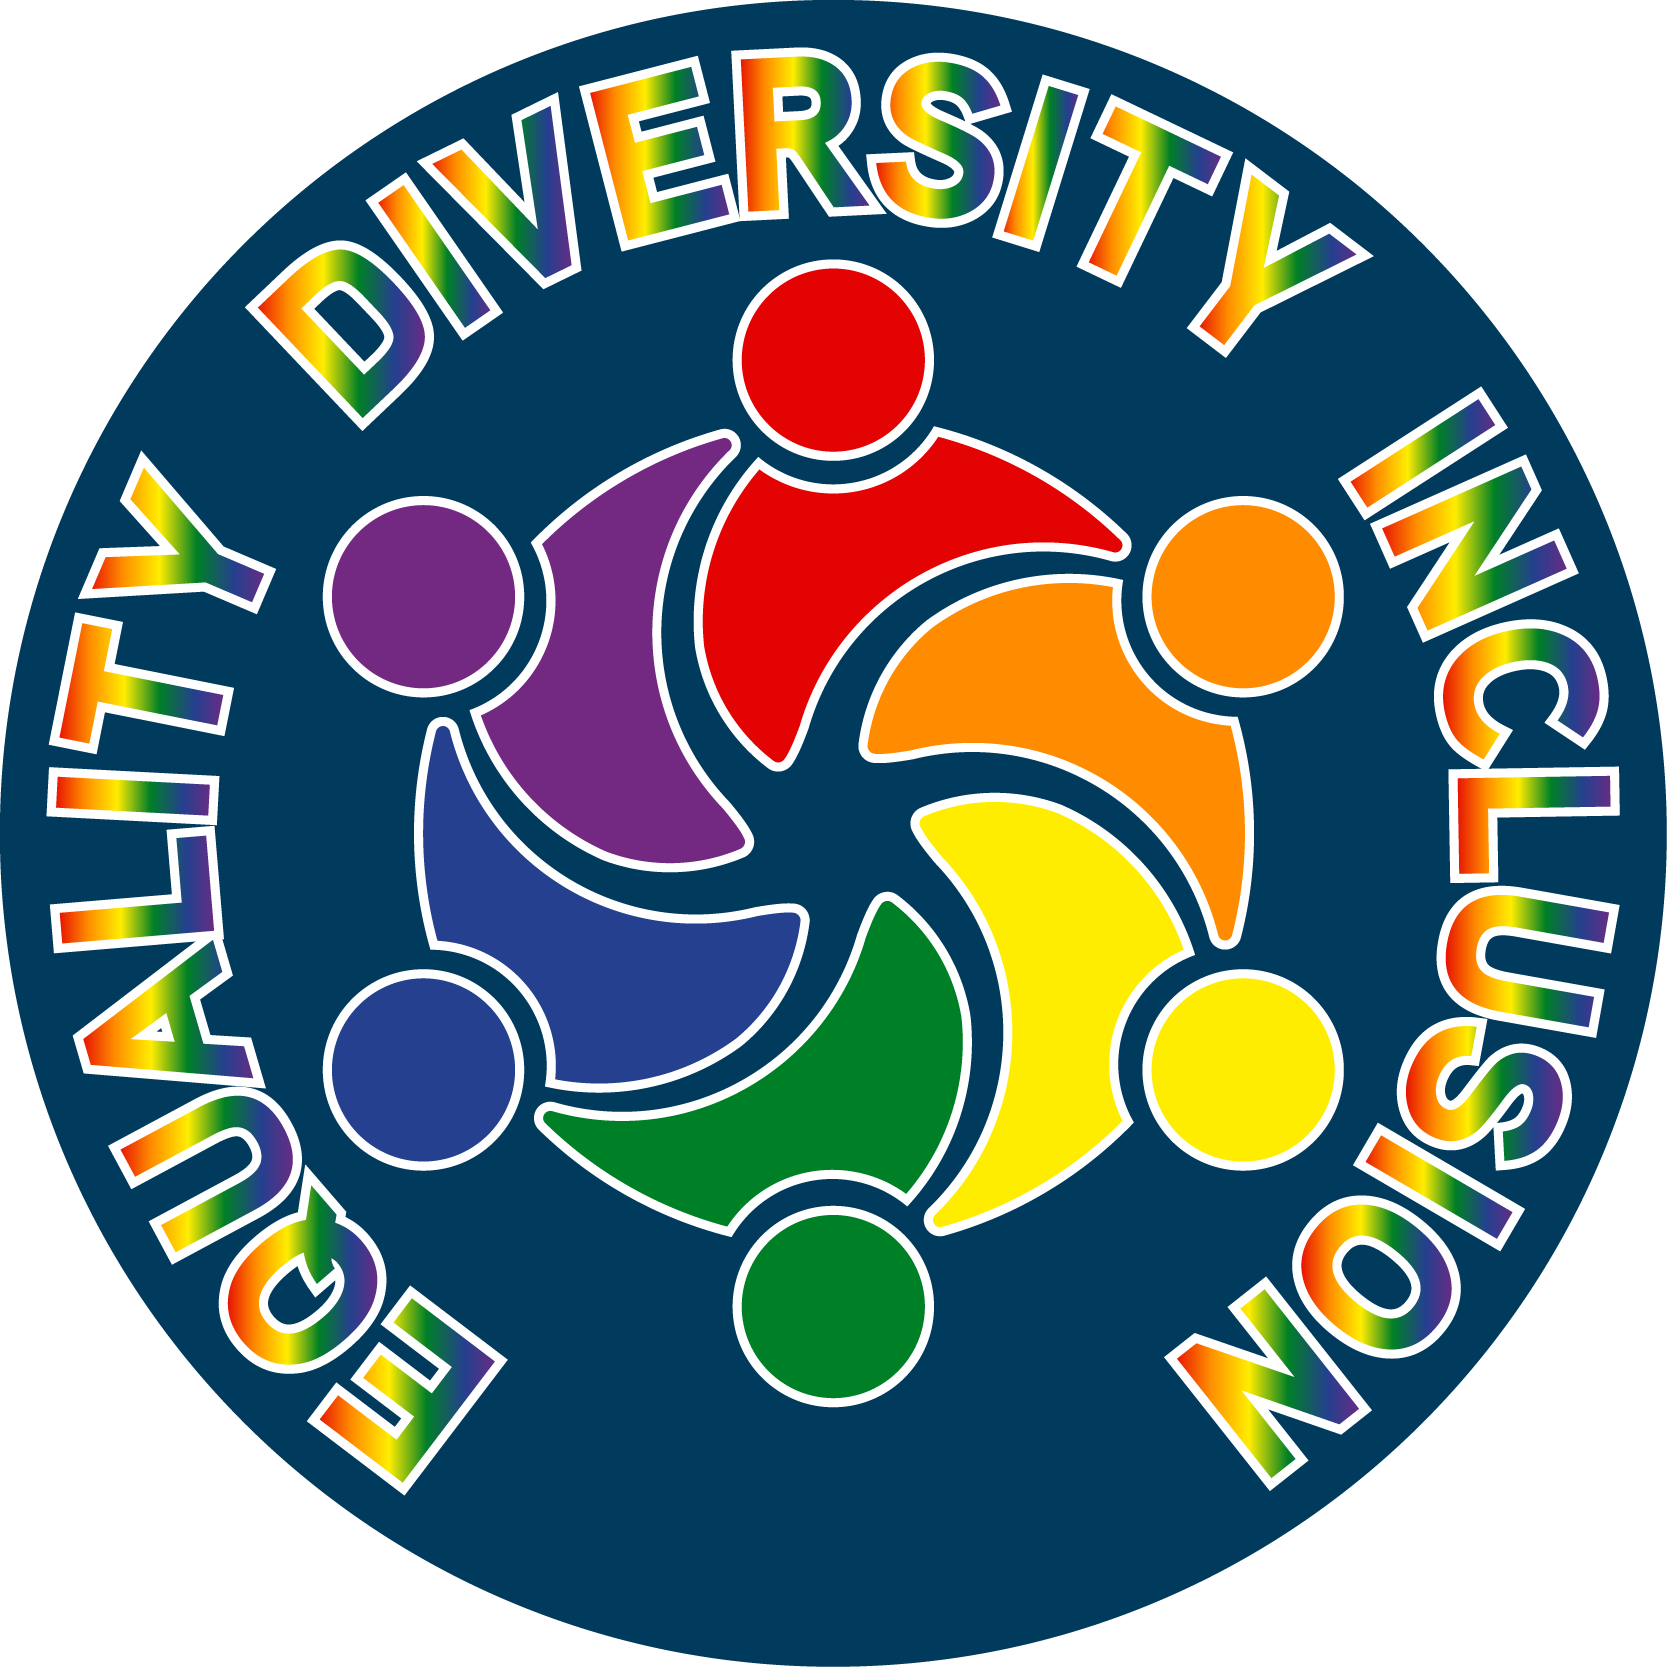 Warlingham Equality, Diversity and Inclusion Logo 